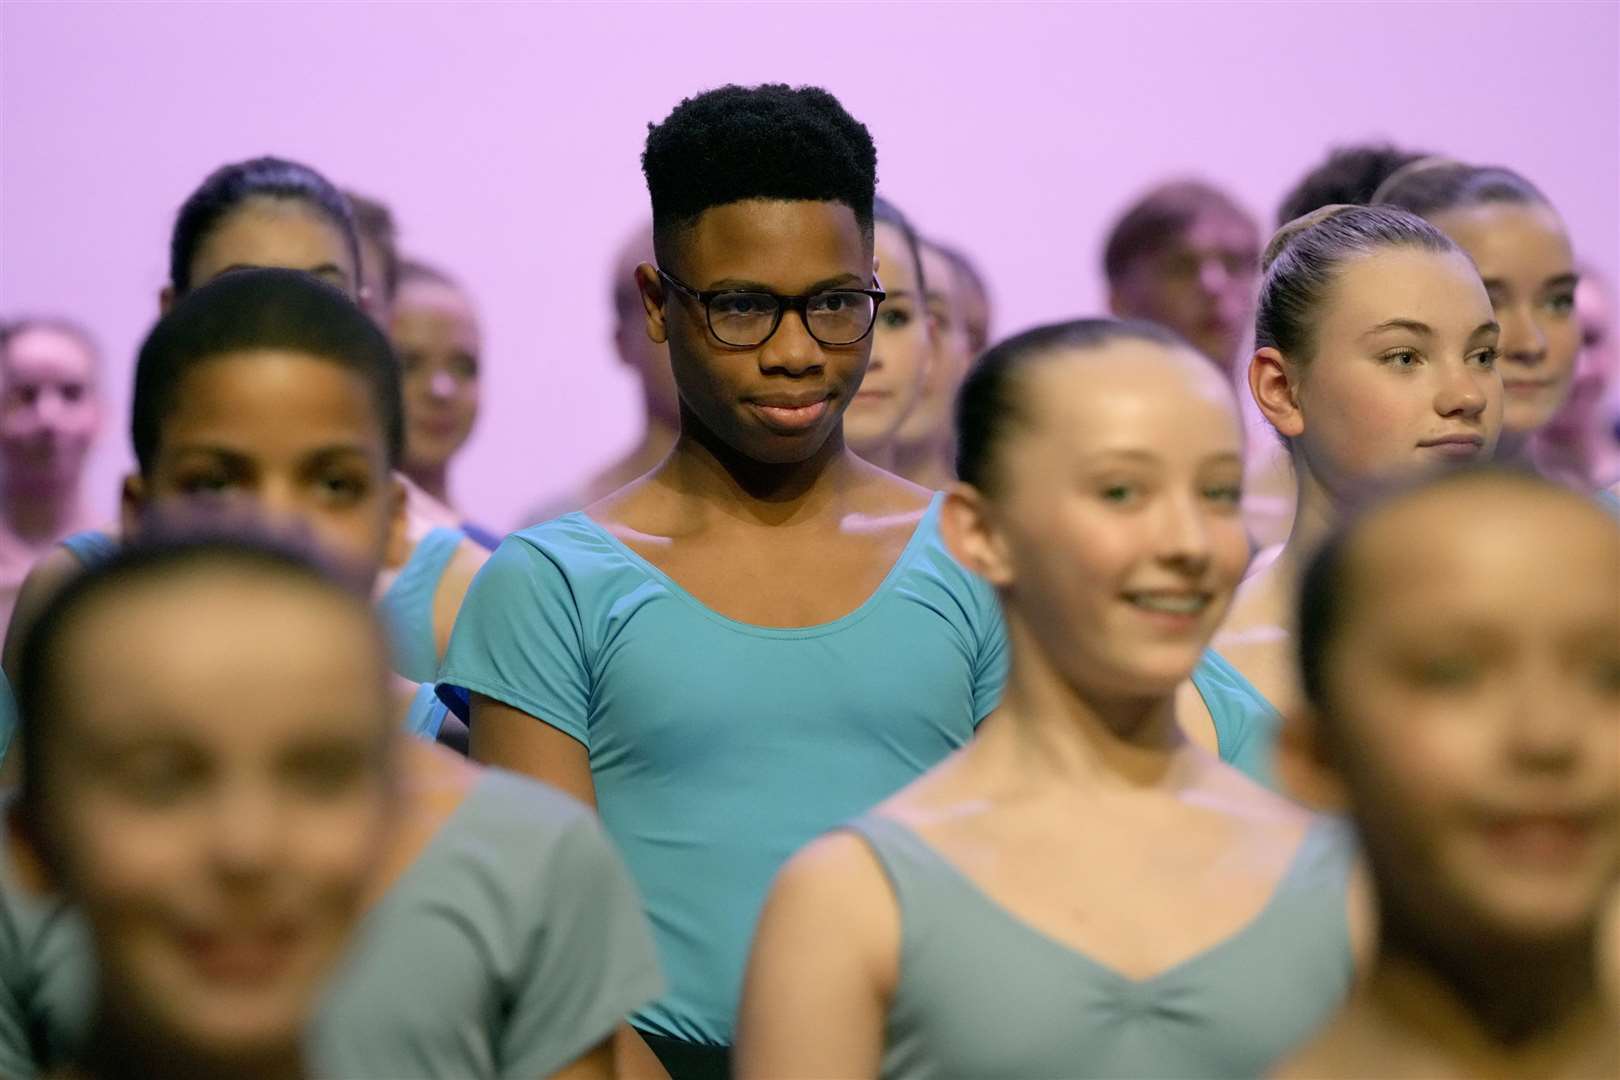 Nigerian dancer Anthony Madu won a scholarship to Elmhurst Ballet School after a video of him dancing in Lagos went viral (Frank Augstein/PA)